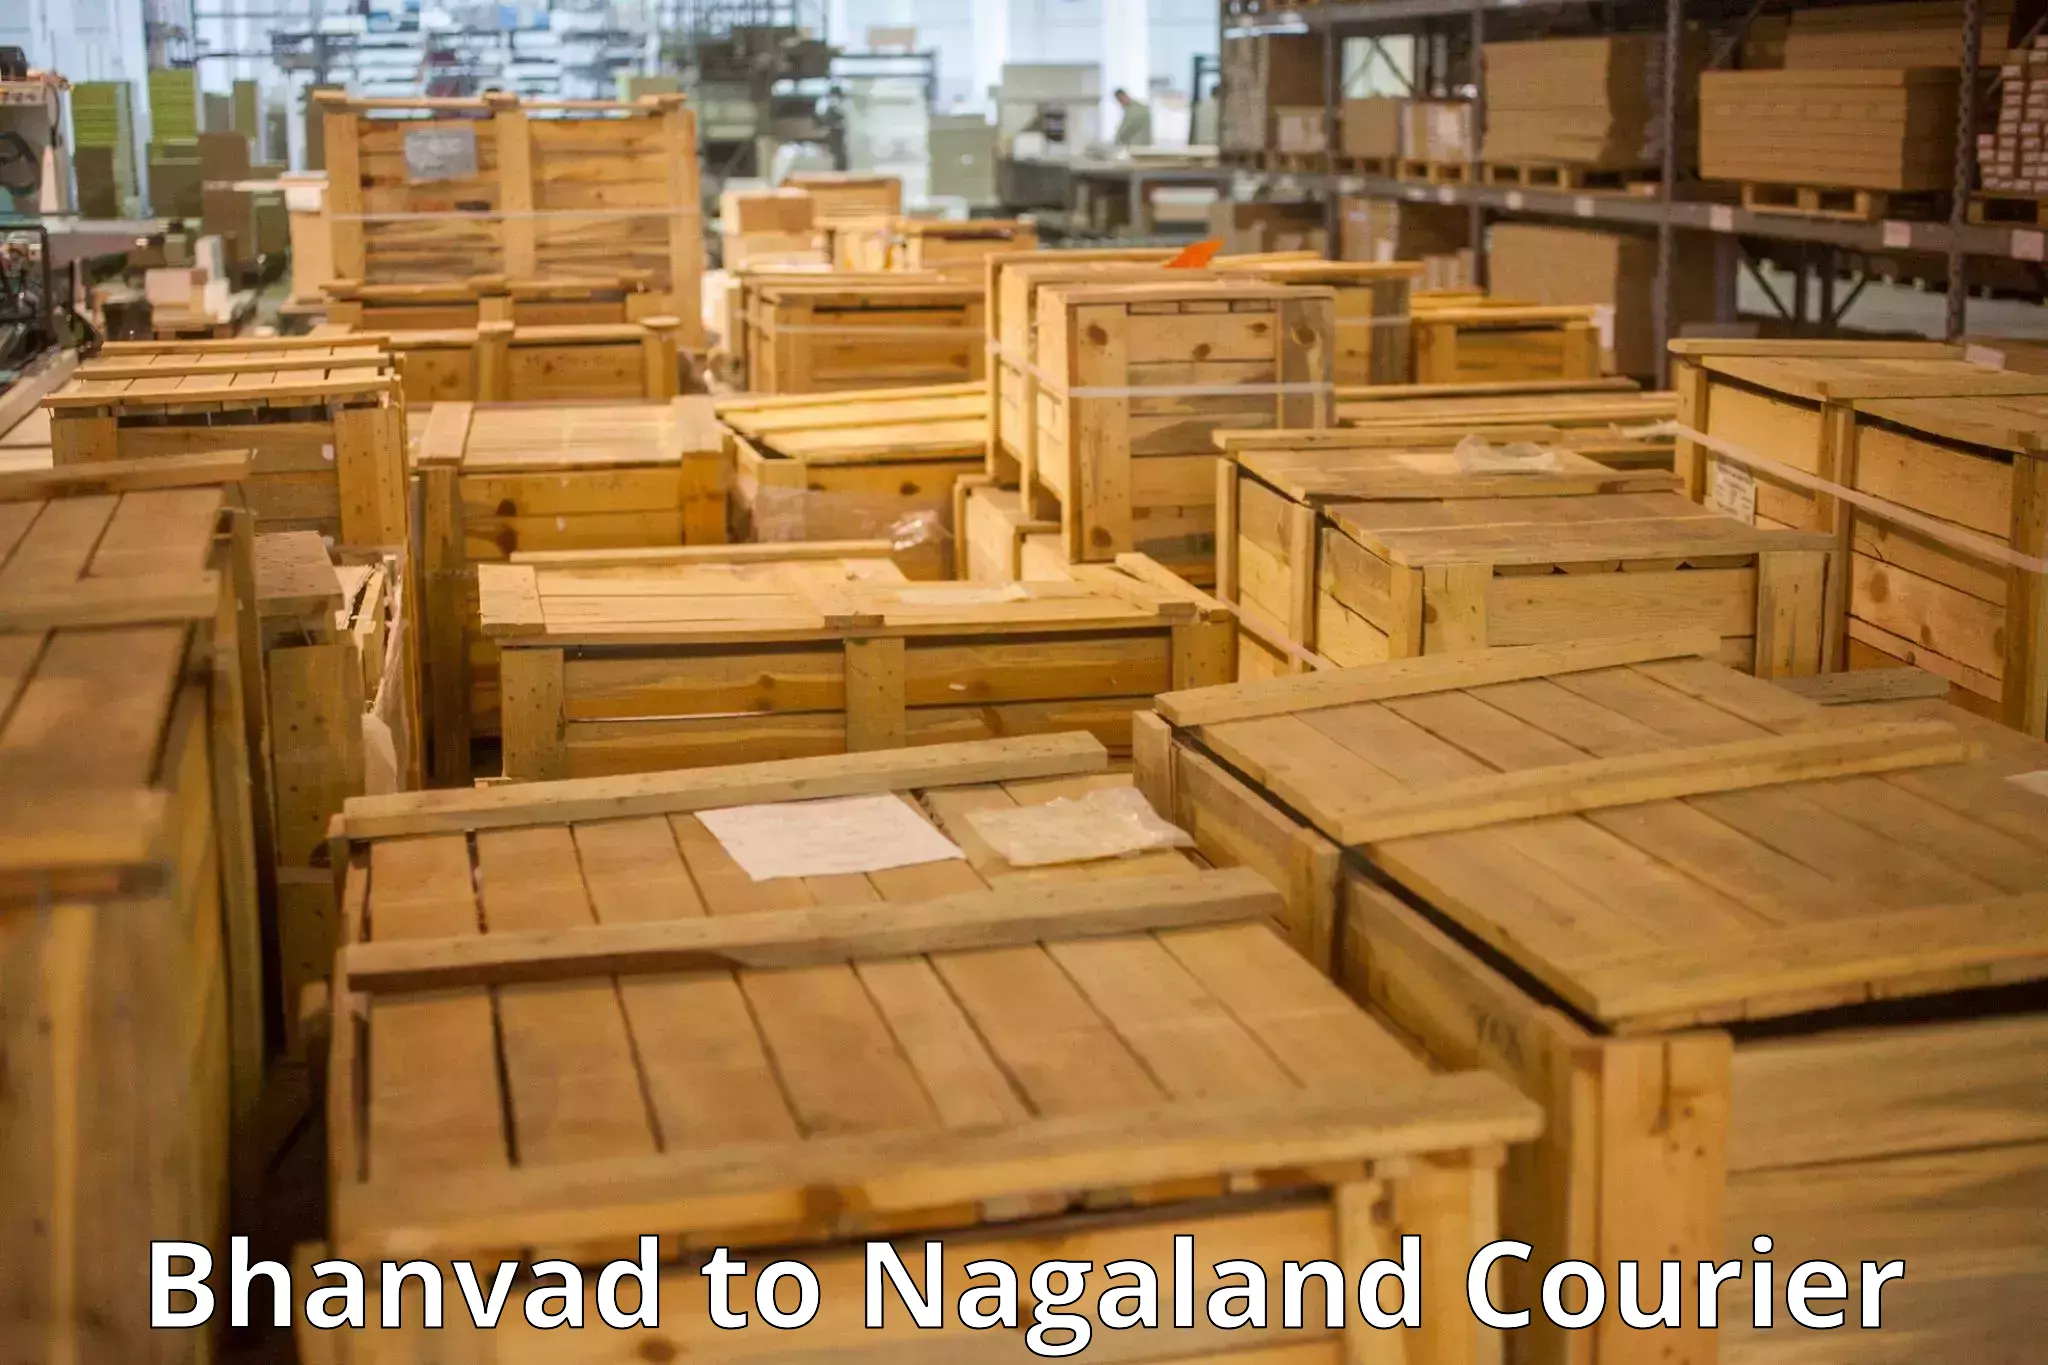 Baggage delivery estimate Bhanvad to Nagaland